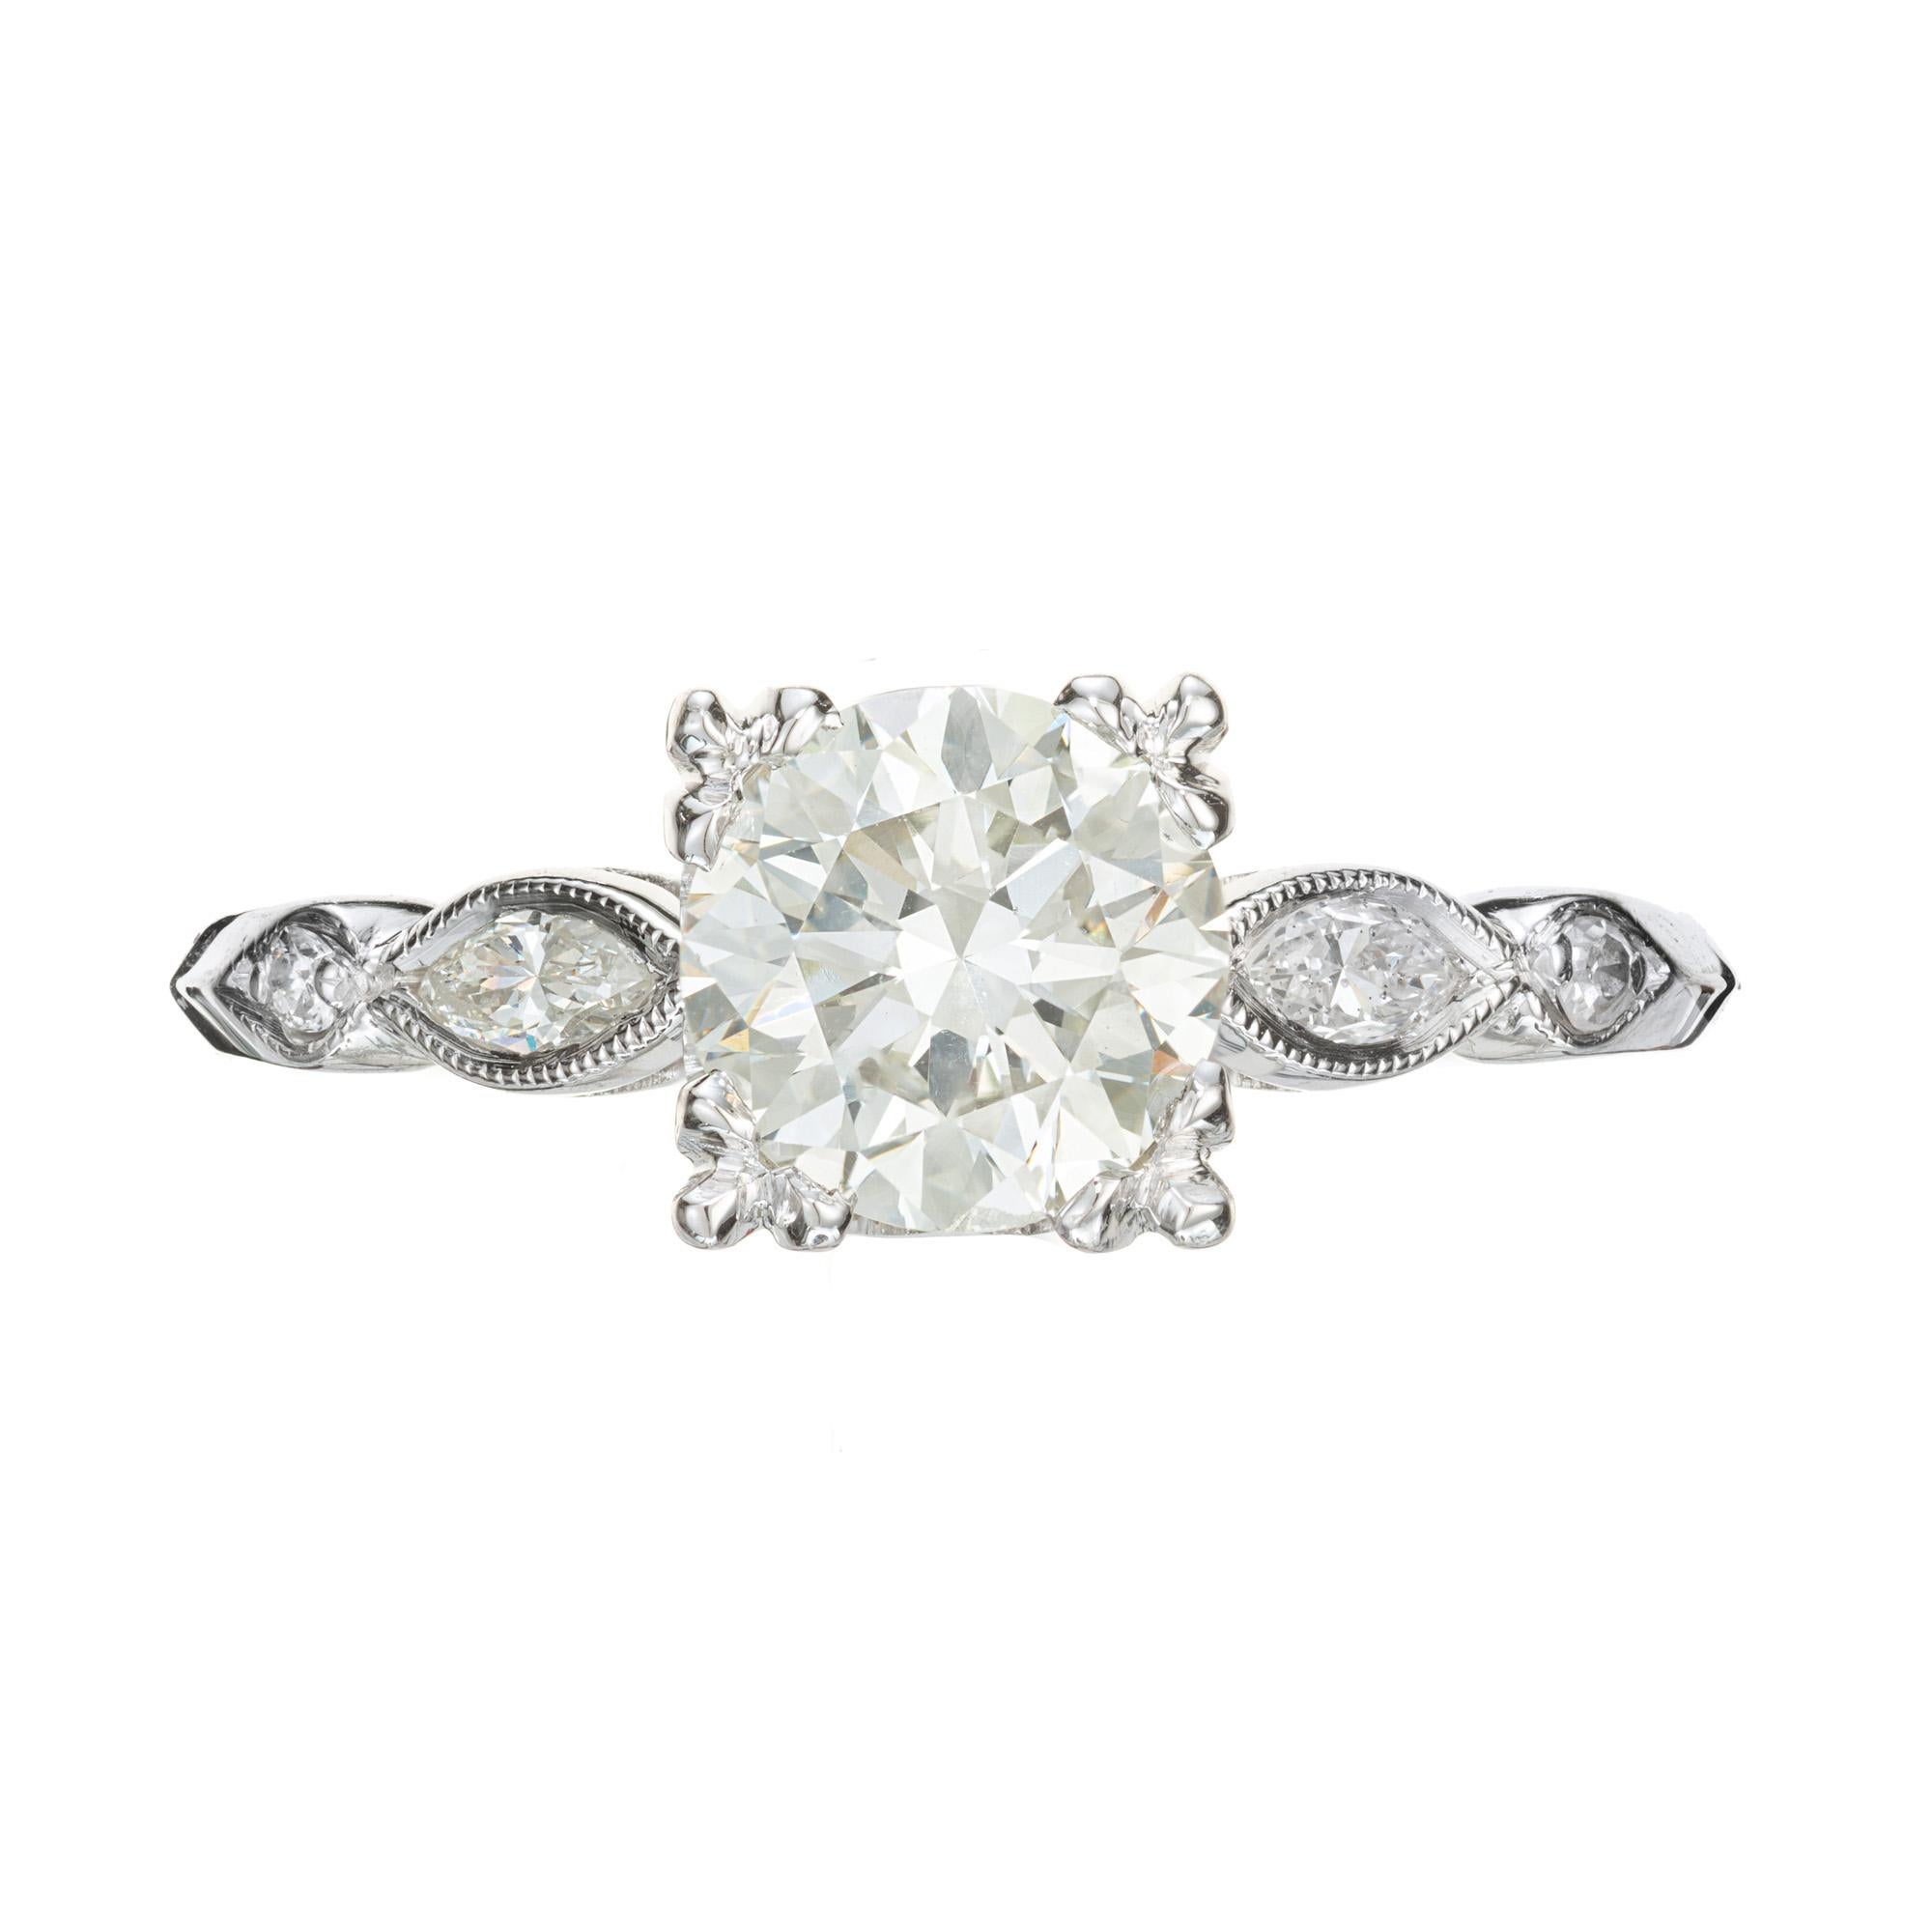 1940's Diamond engagement ring. GIA certified round brilliant cut center diamond with 2 marquise and 2 round brilliant cut side diamonds. Transitional 1940's cutting makes the diamond whiter and brighter.

1 round brilliant cut diamond, K VS2